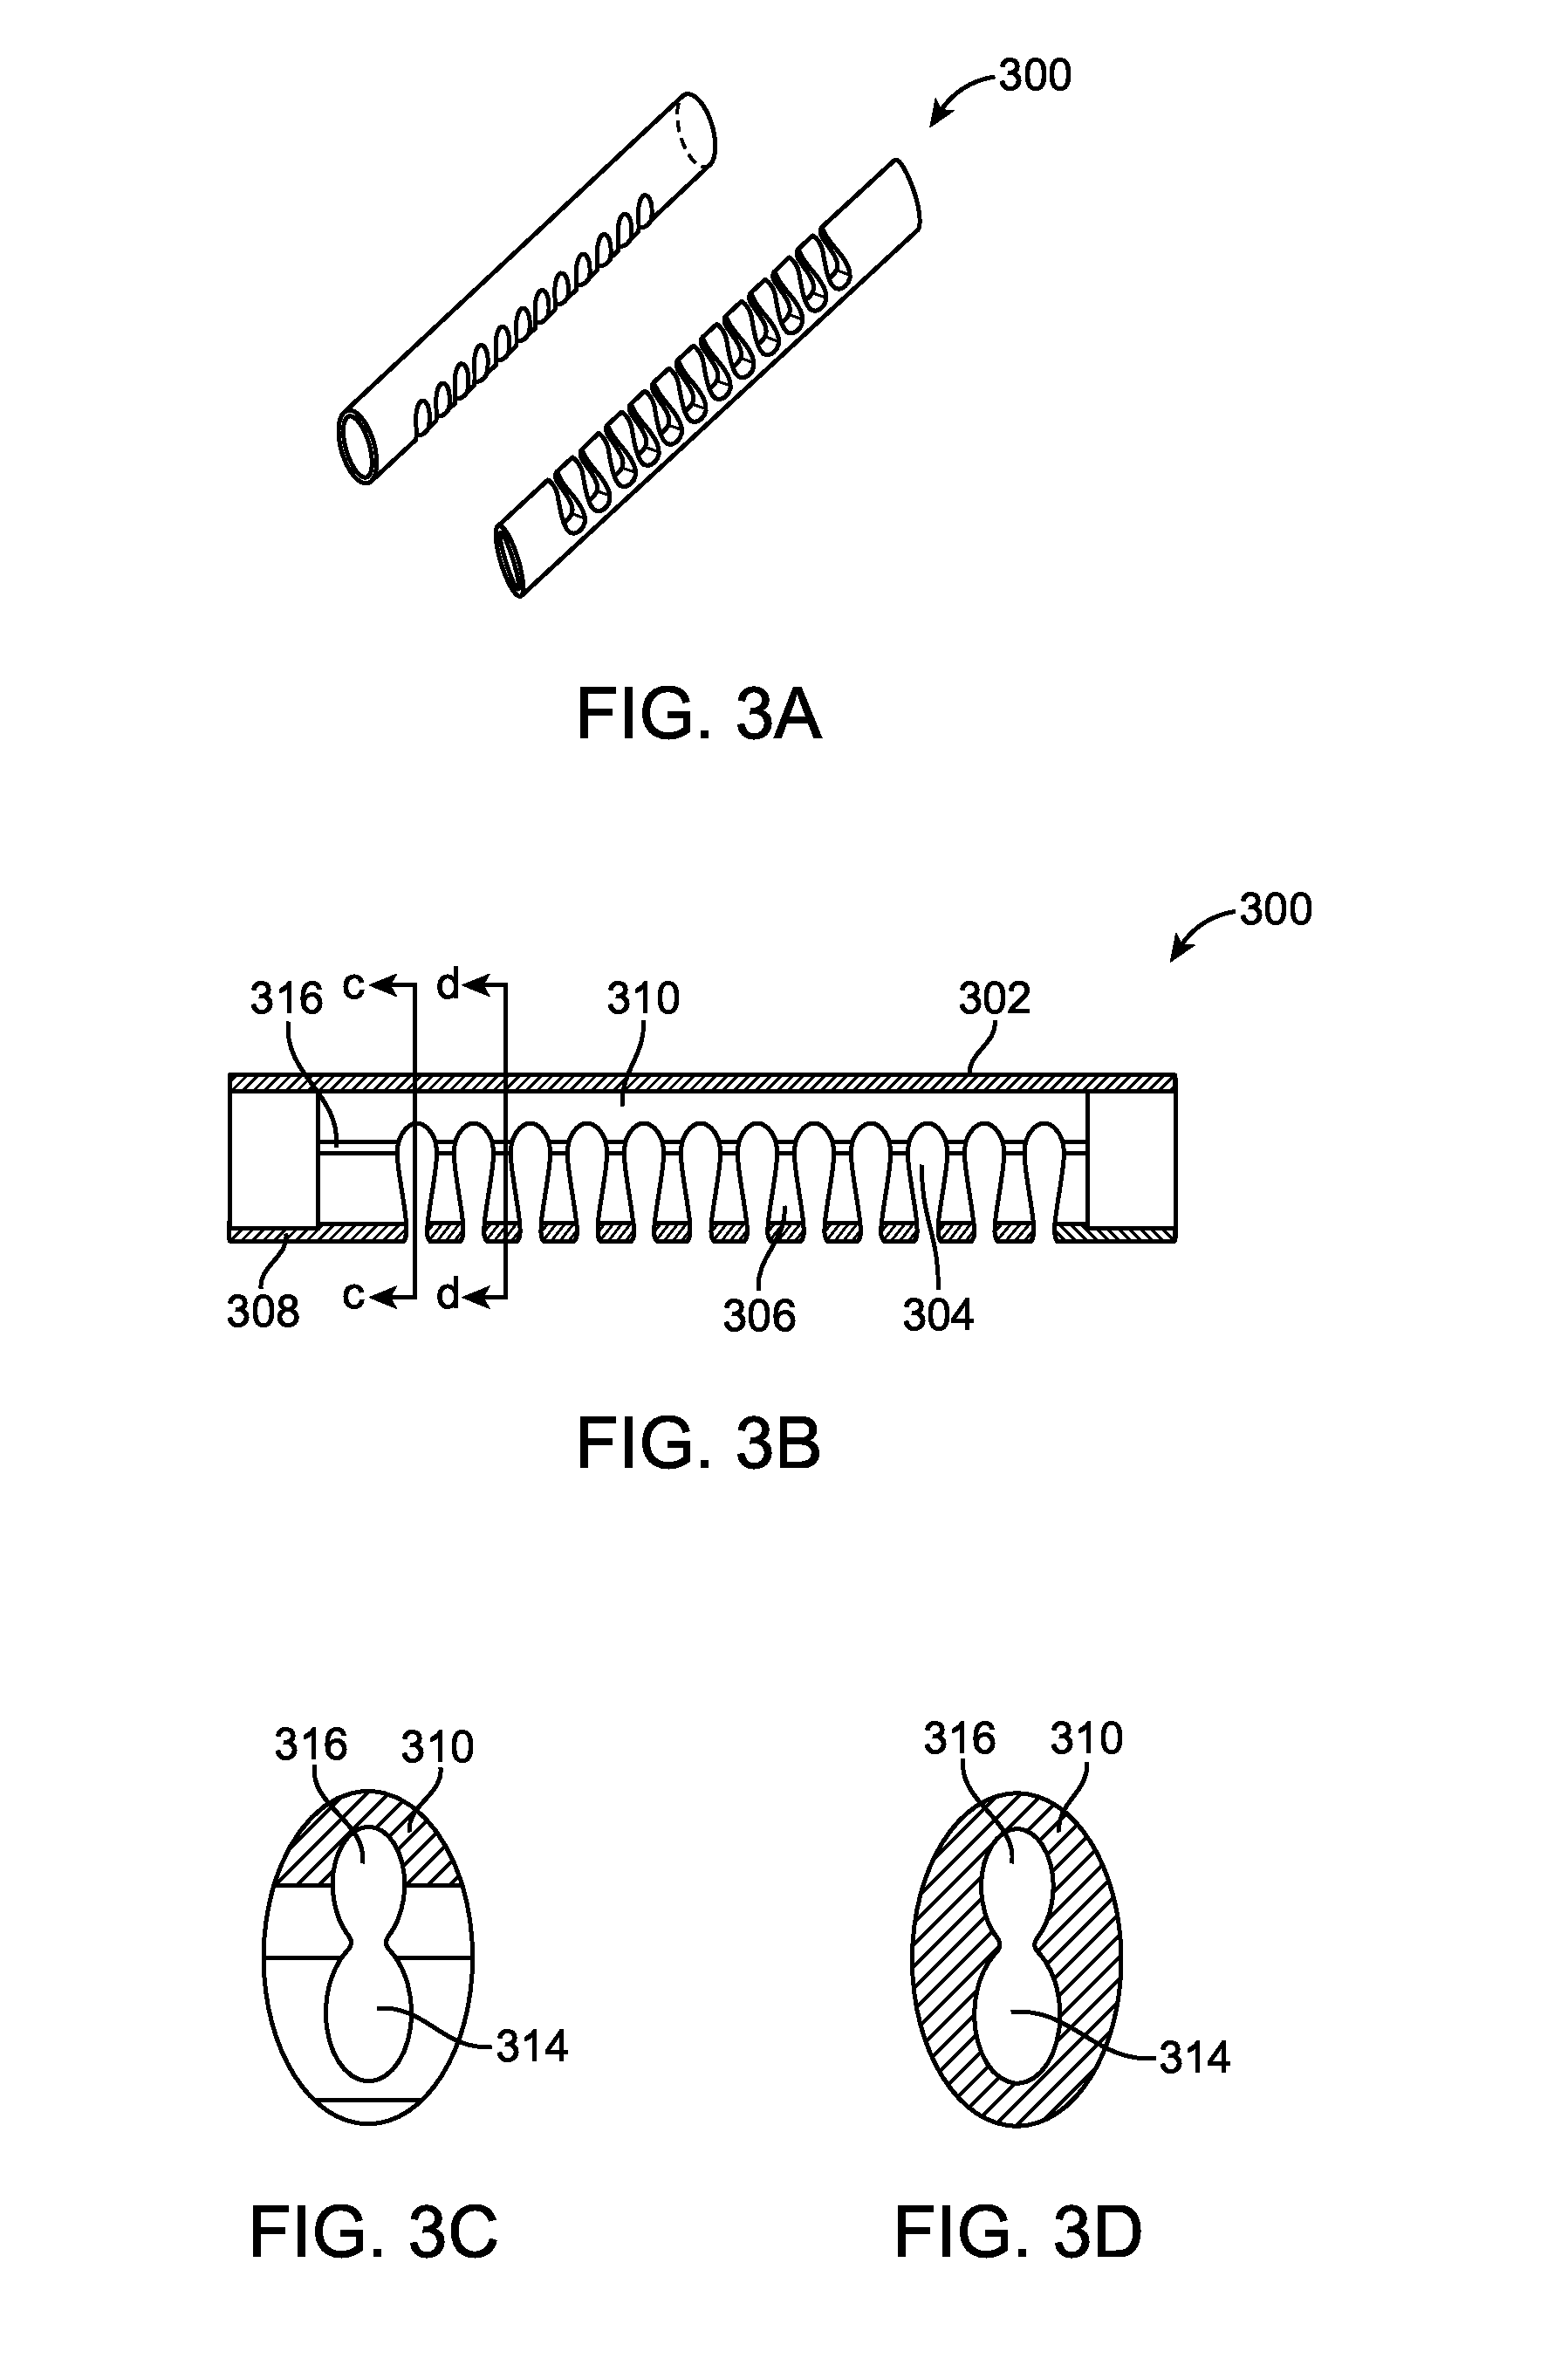 Method, apparatus, and a system for facilitating bending of an instrument in a surgical or medical robotic environment